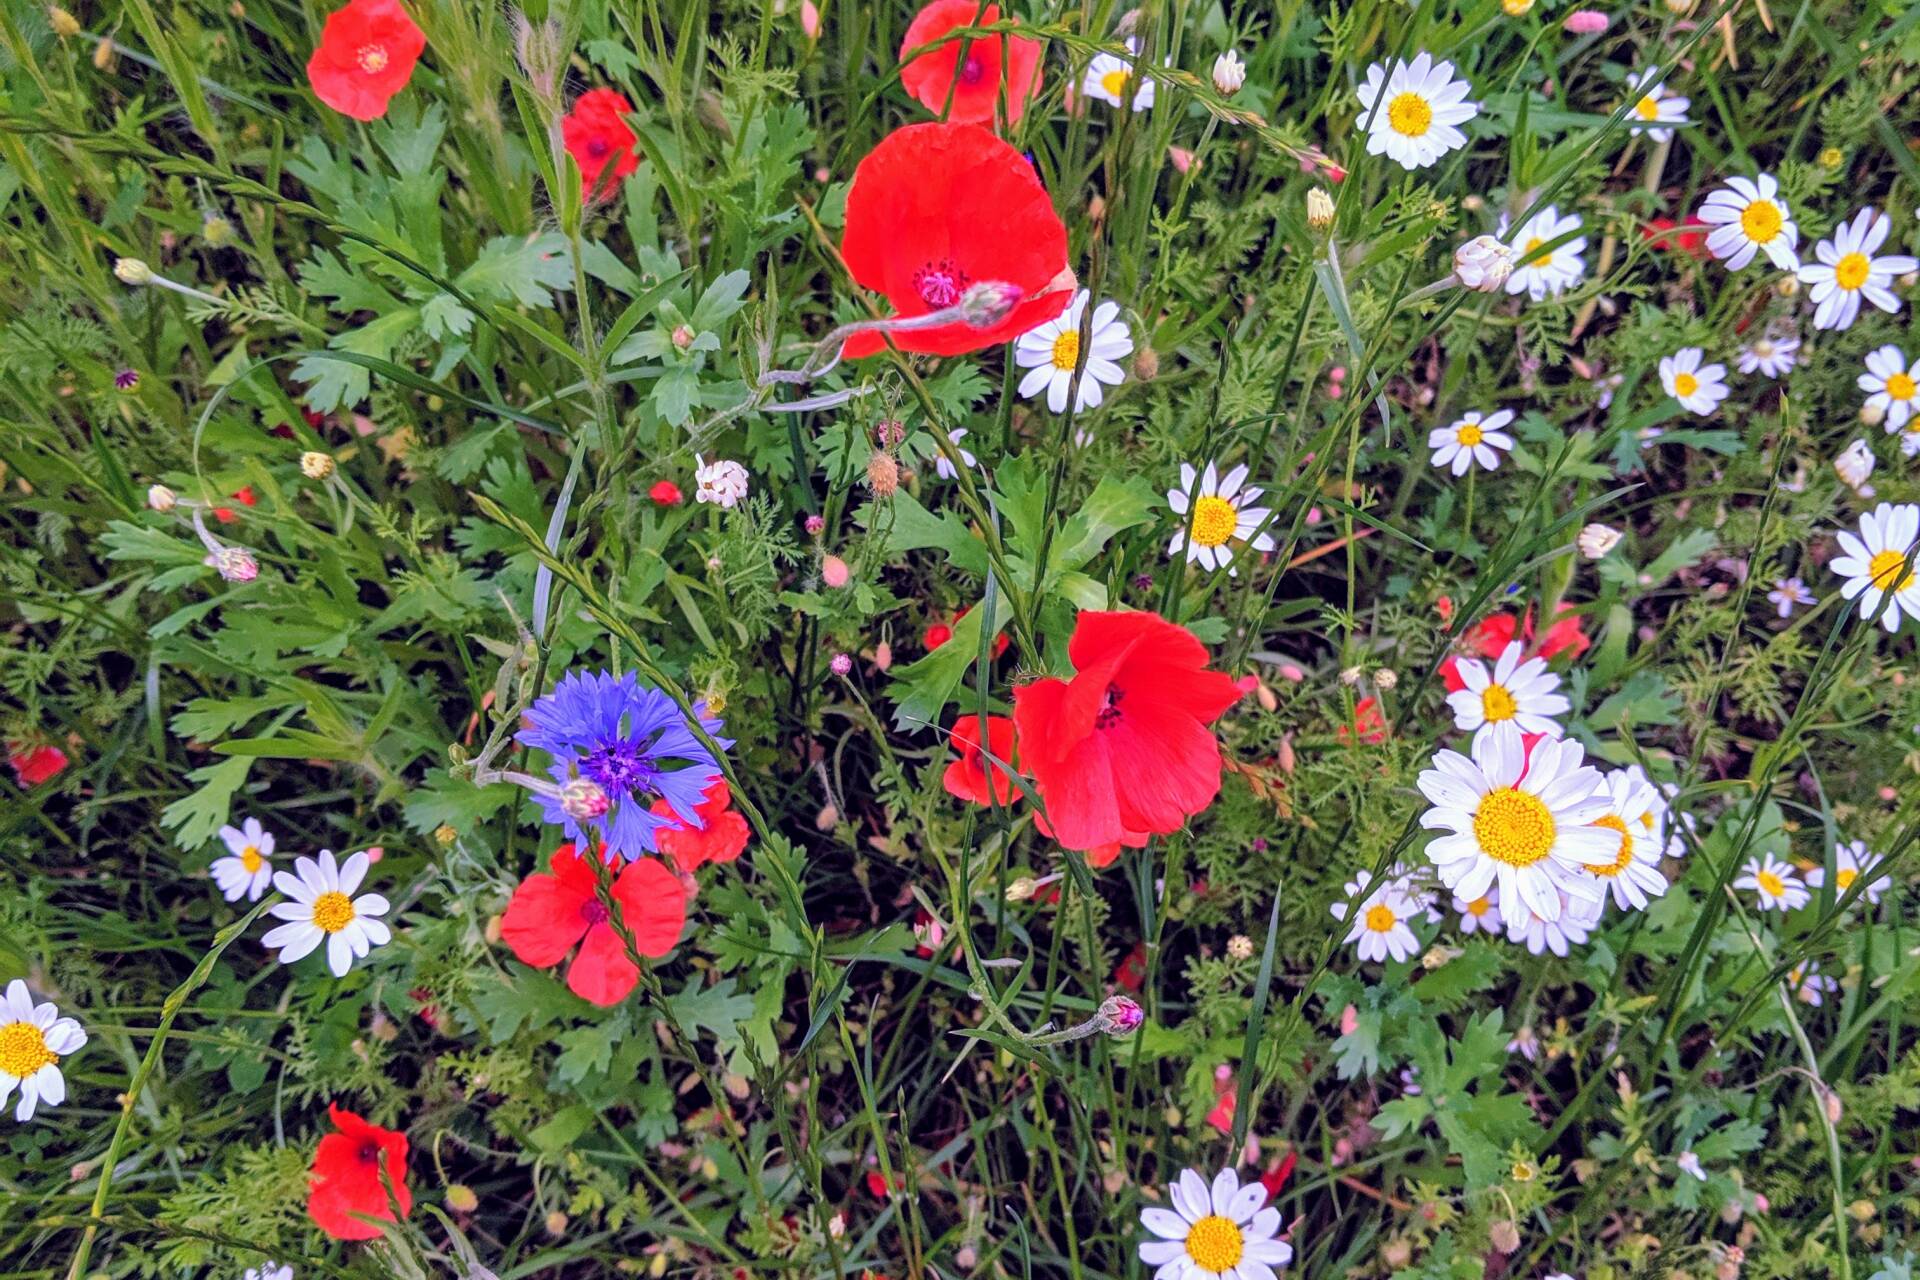 A meadow of flowers including Dasies, Cornflowers and Poppies